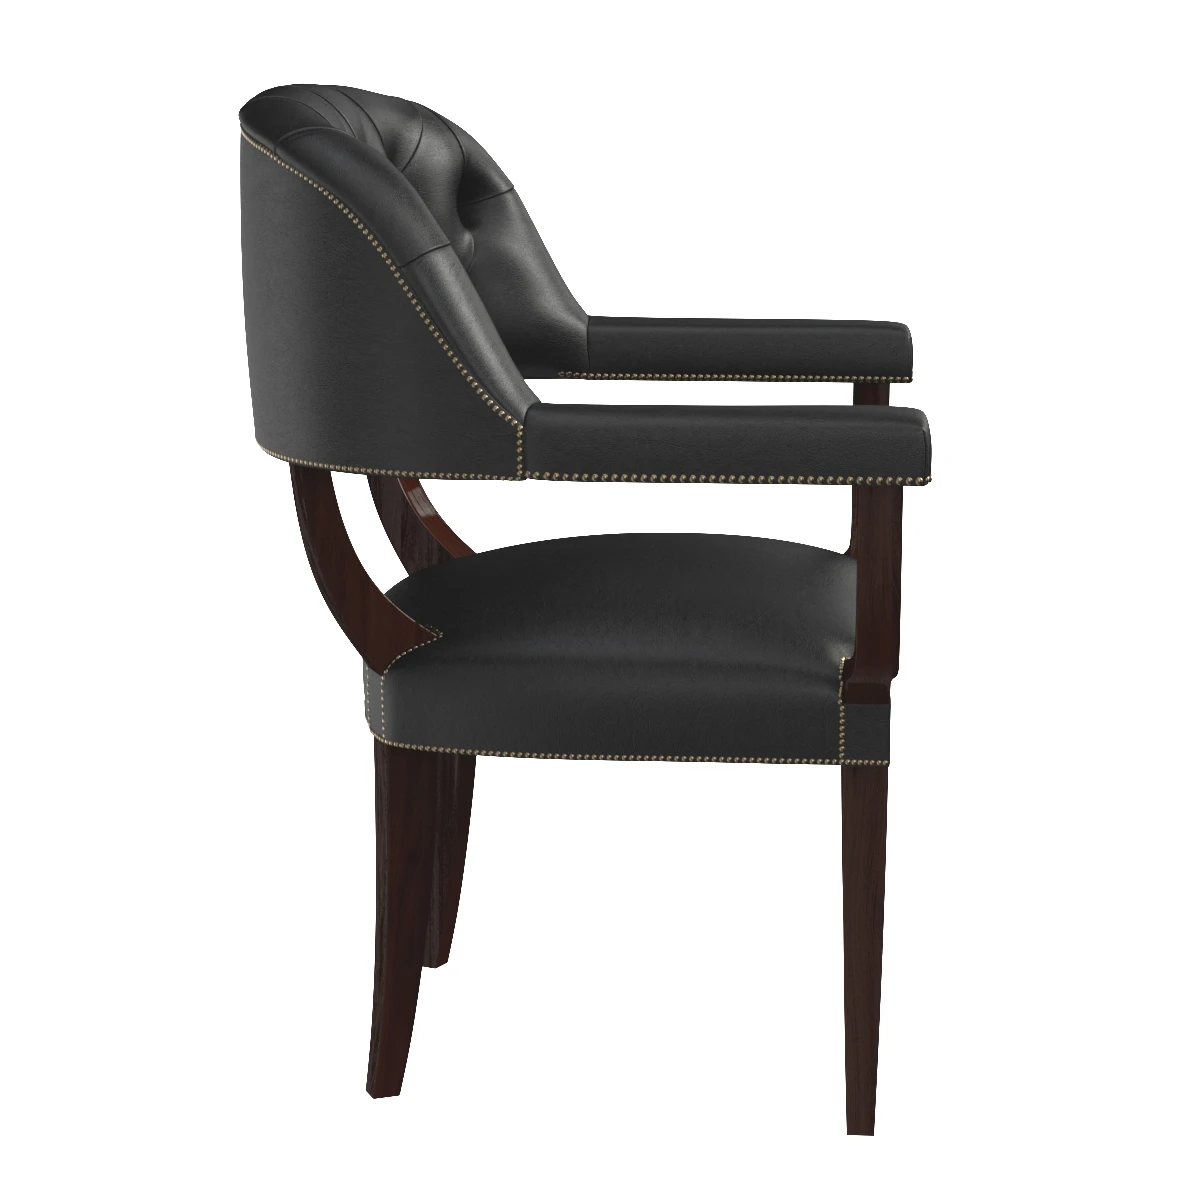 Mid-20th Century Black Leather Tub Armchairs 3D Model_04